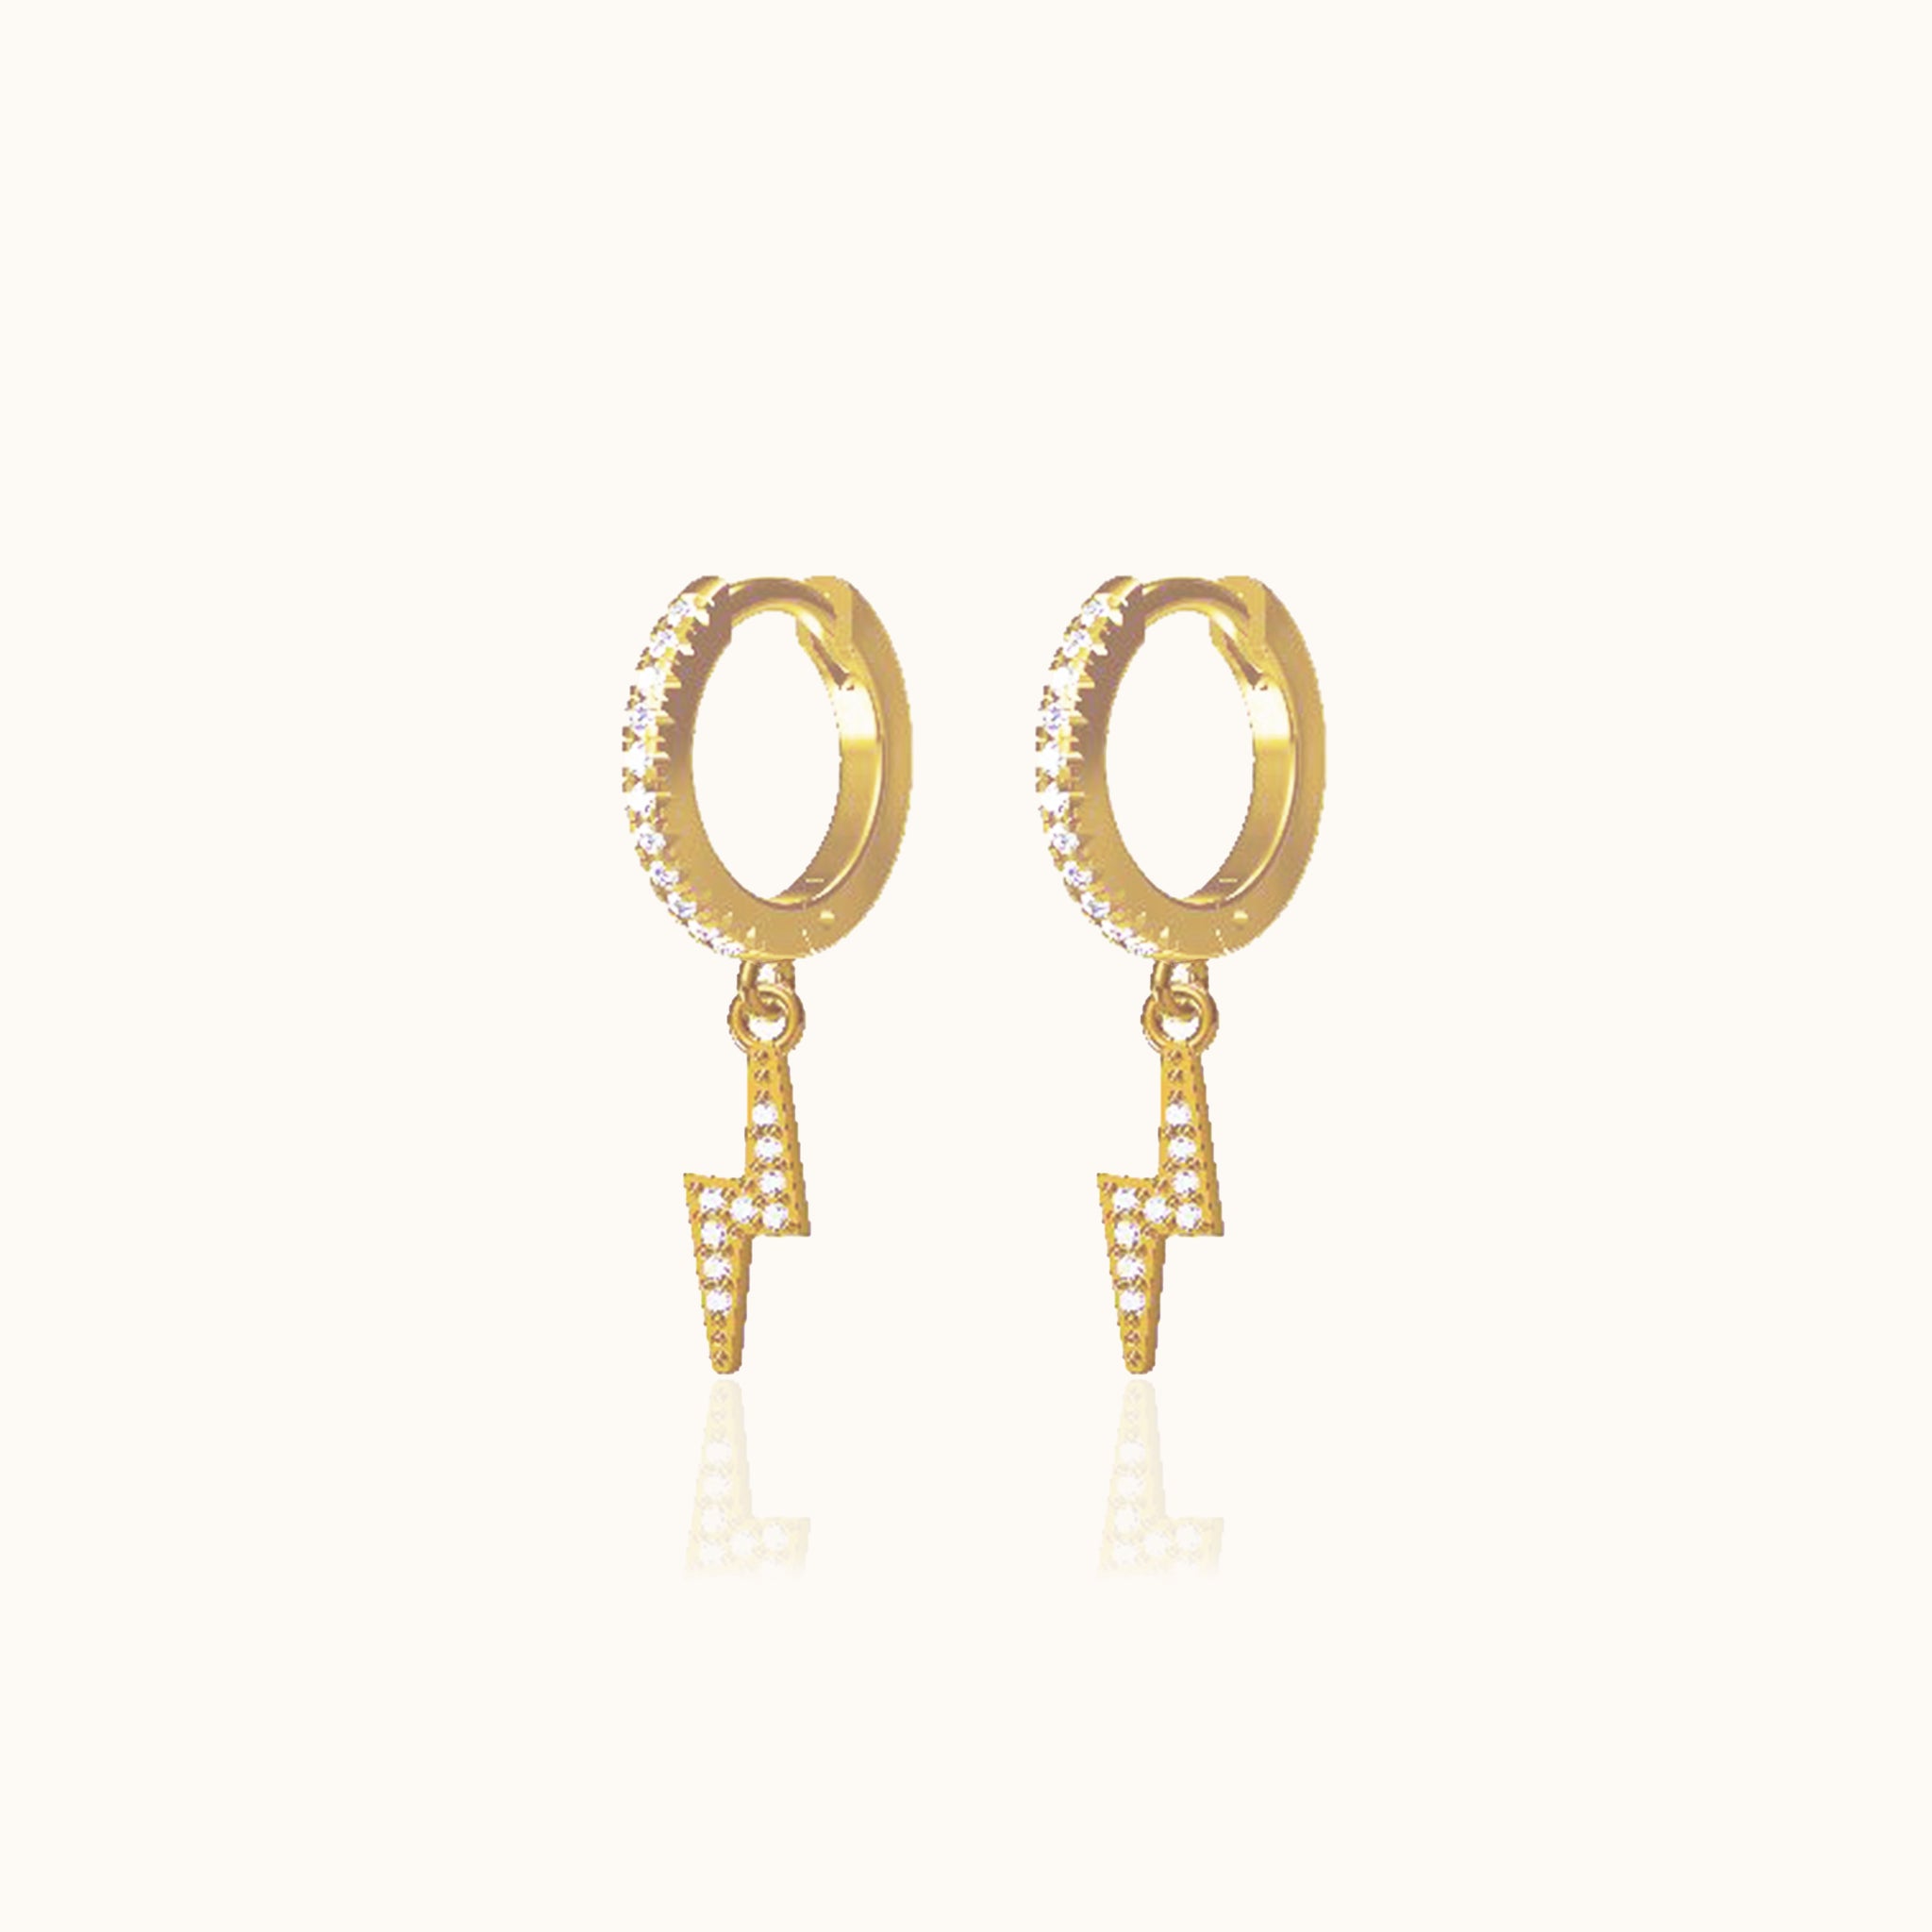 Everyday fine/semi-fine earrings in NYC that not irritate your ears ...